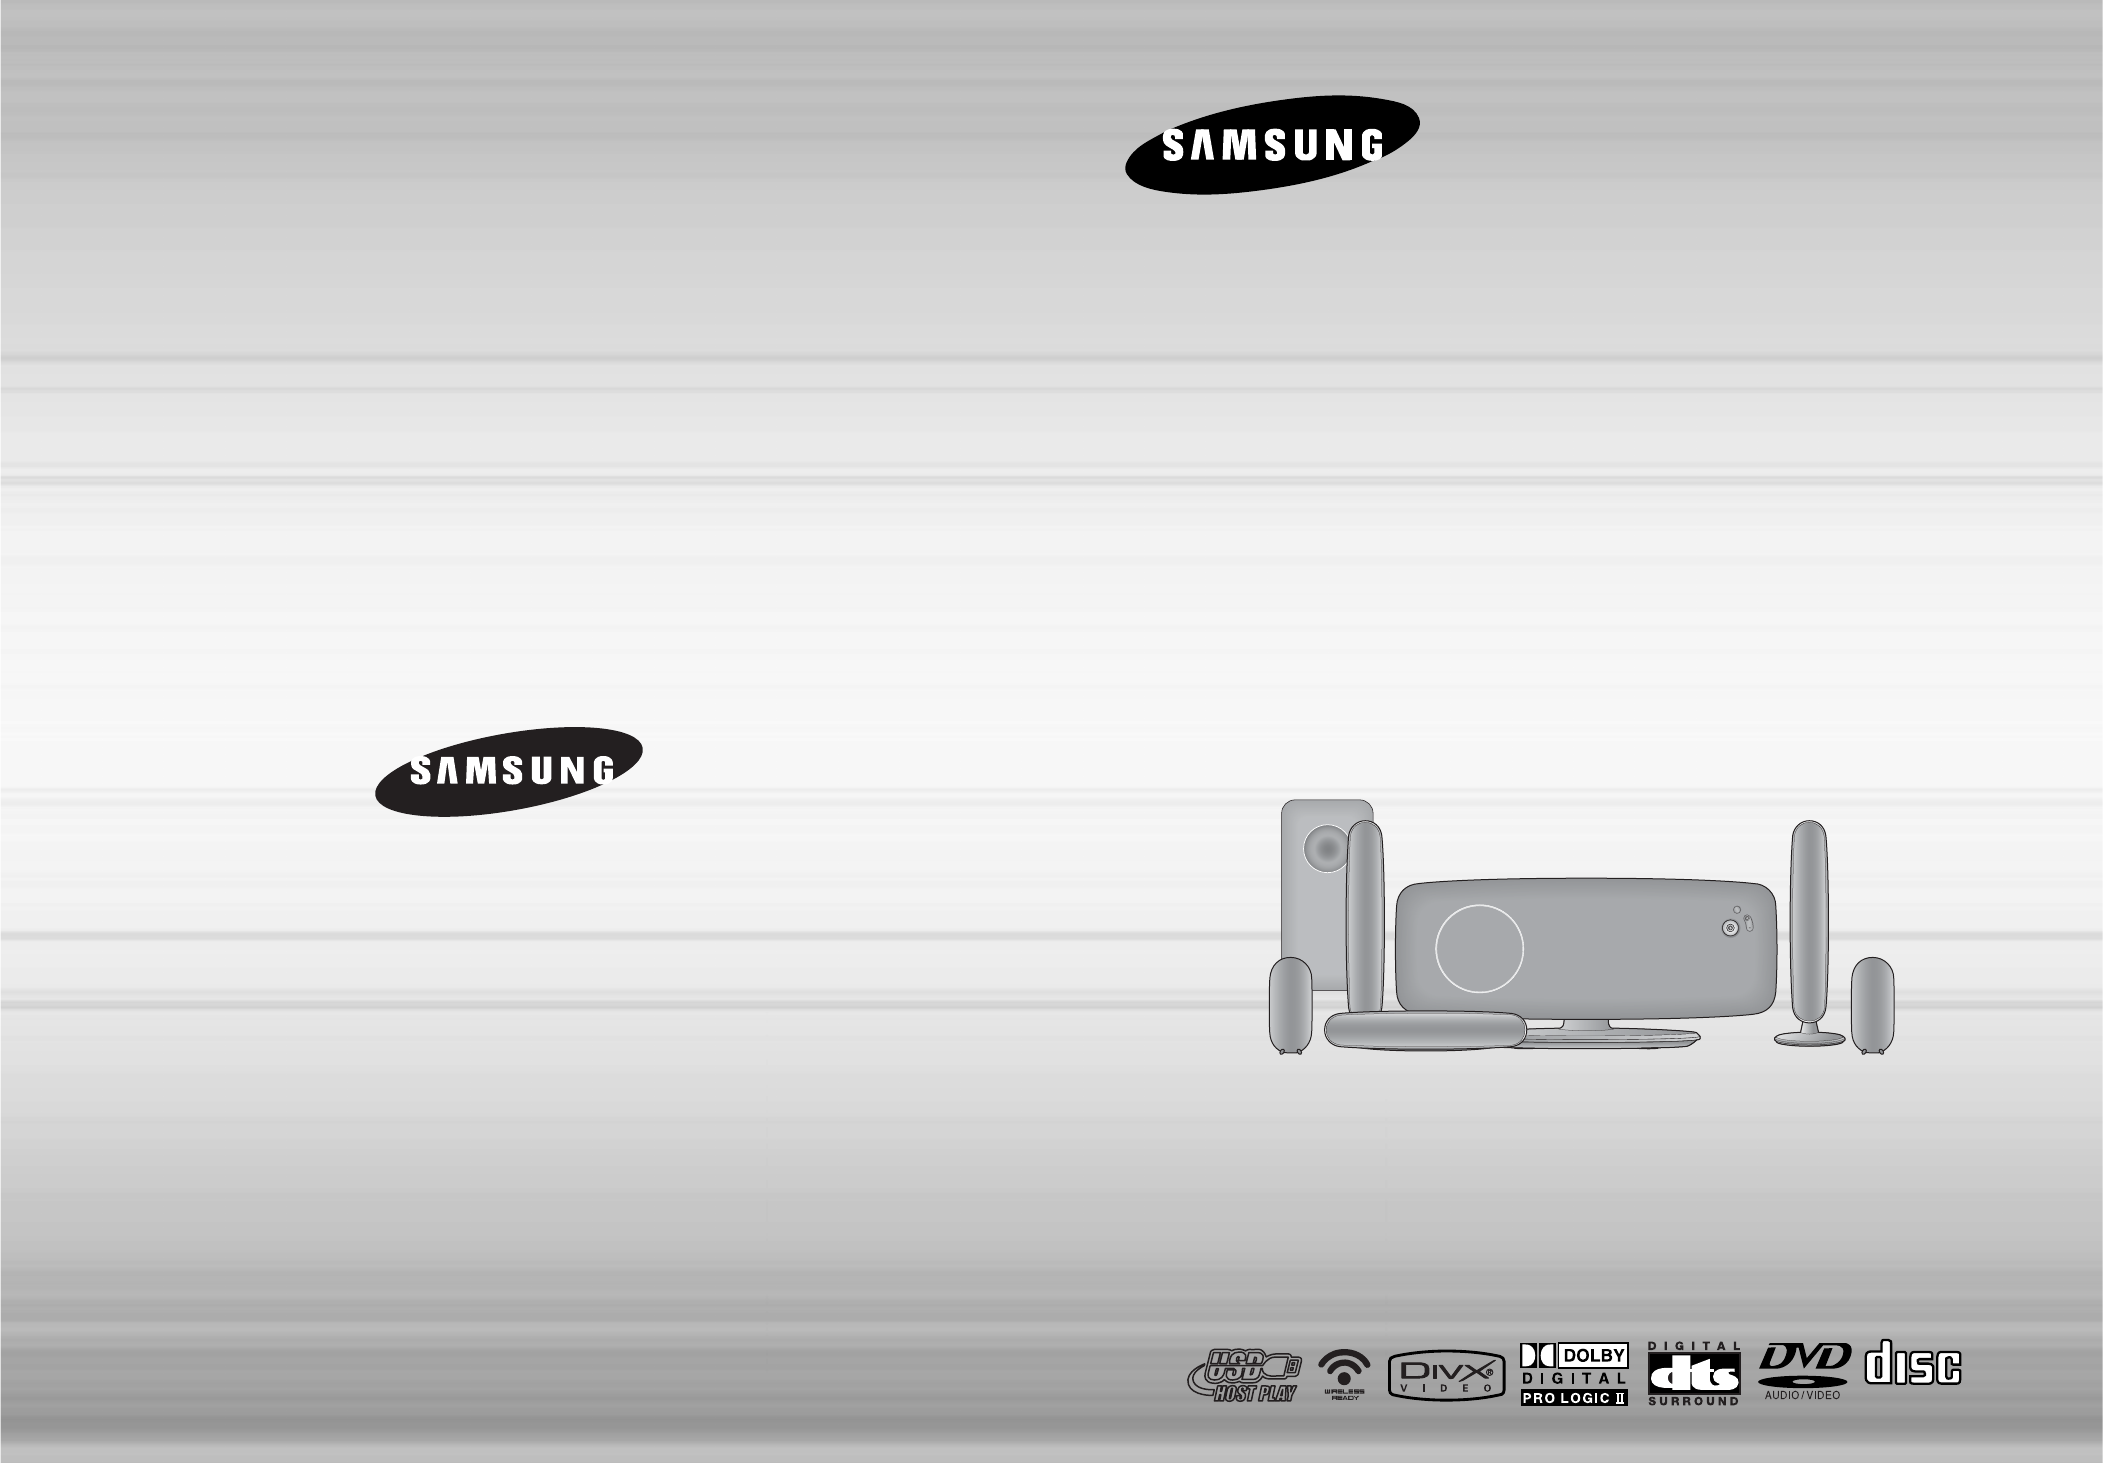 Samsung Ah64 Home Theater Manual - Samsung Smartphone Review